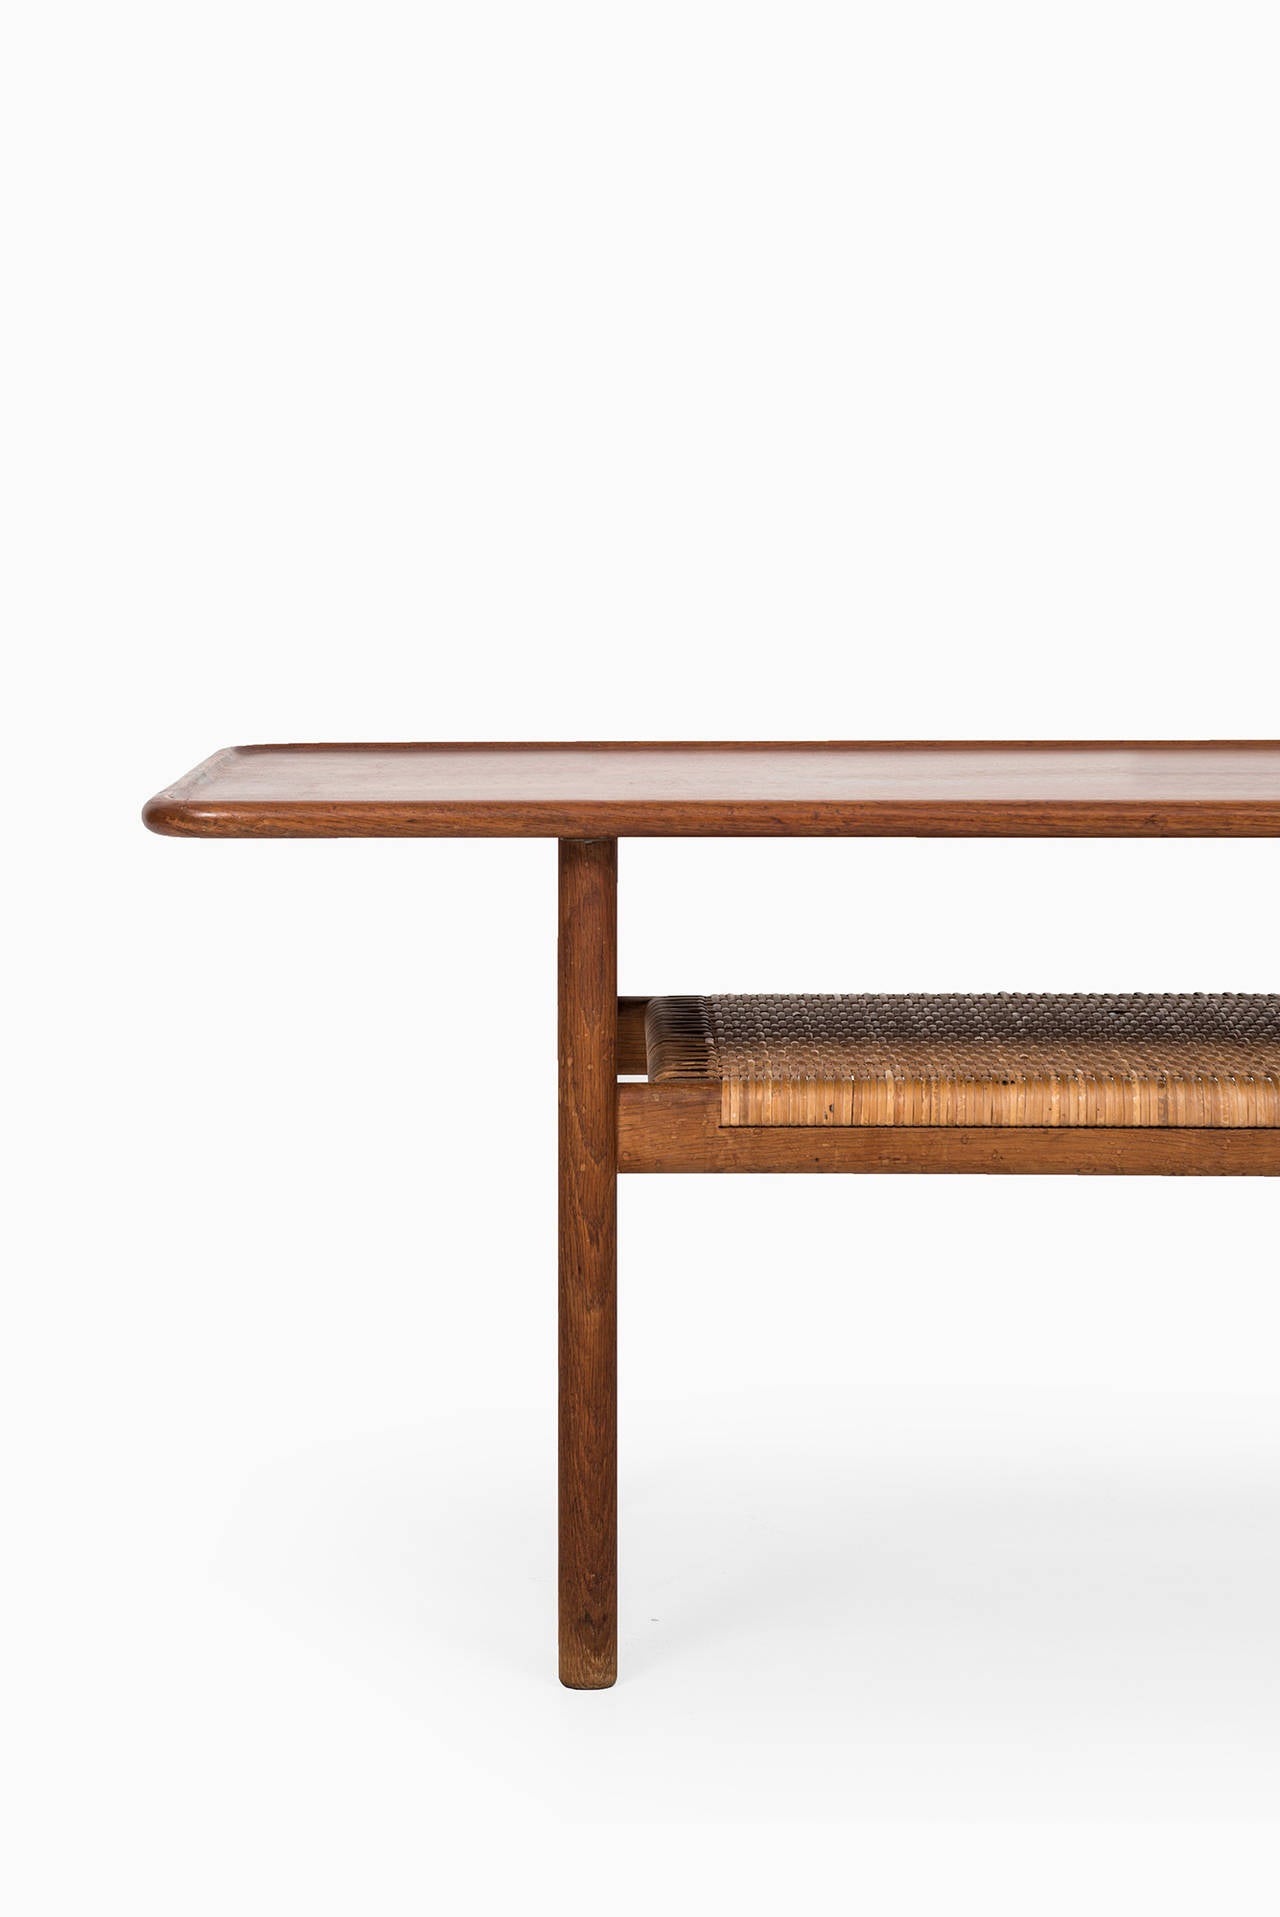 Rare coffee table model AT-10 designed by Hans Wegner. Produced by Andreas Tuck in Denmark.